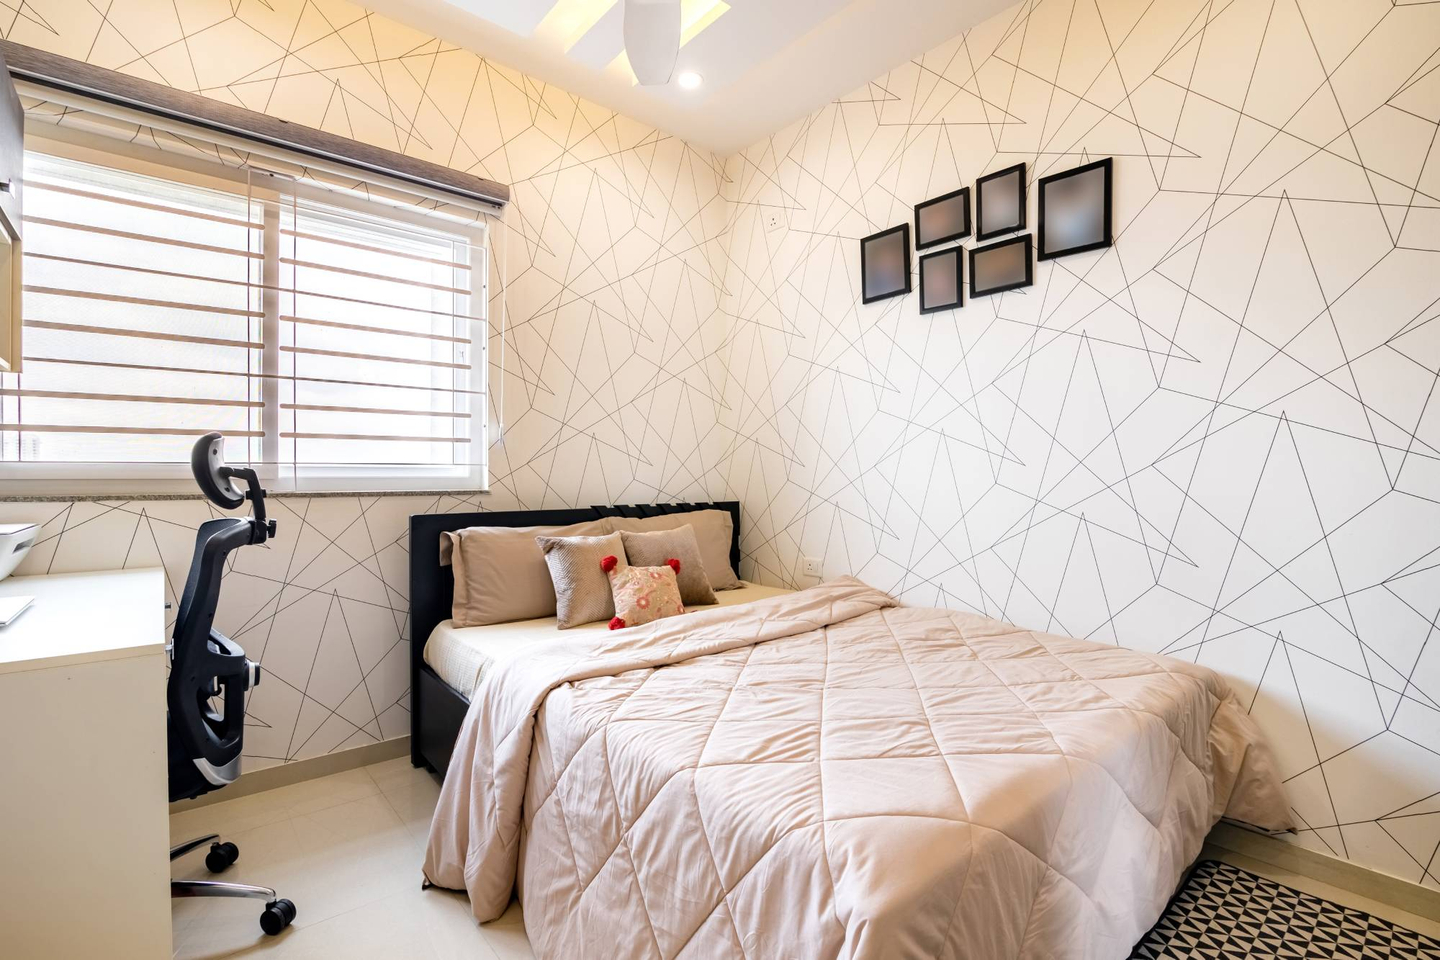 Guest Room With Geometric Wallpaper - Livspace